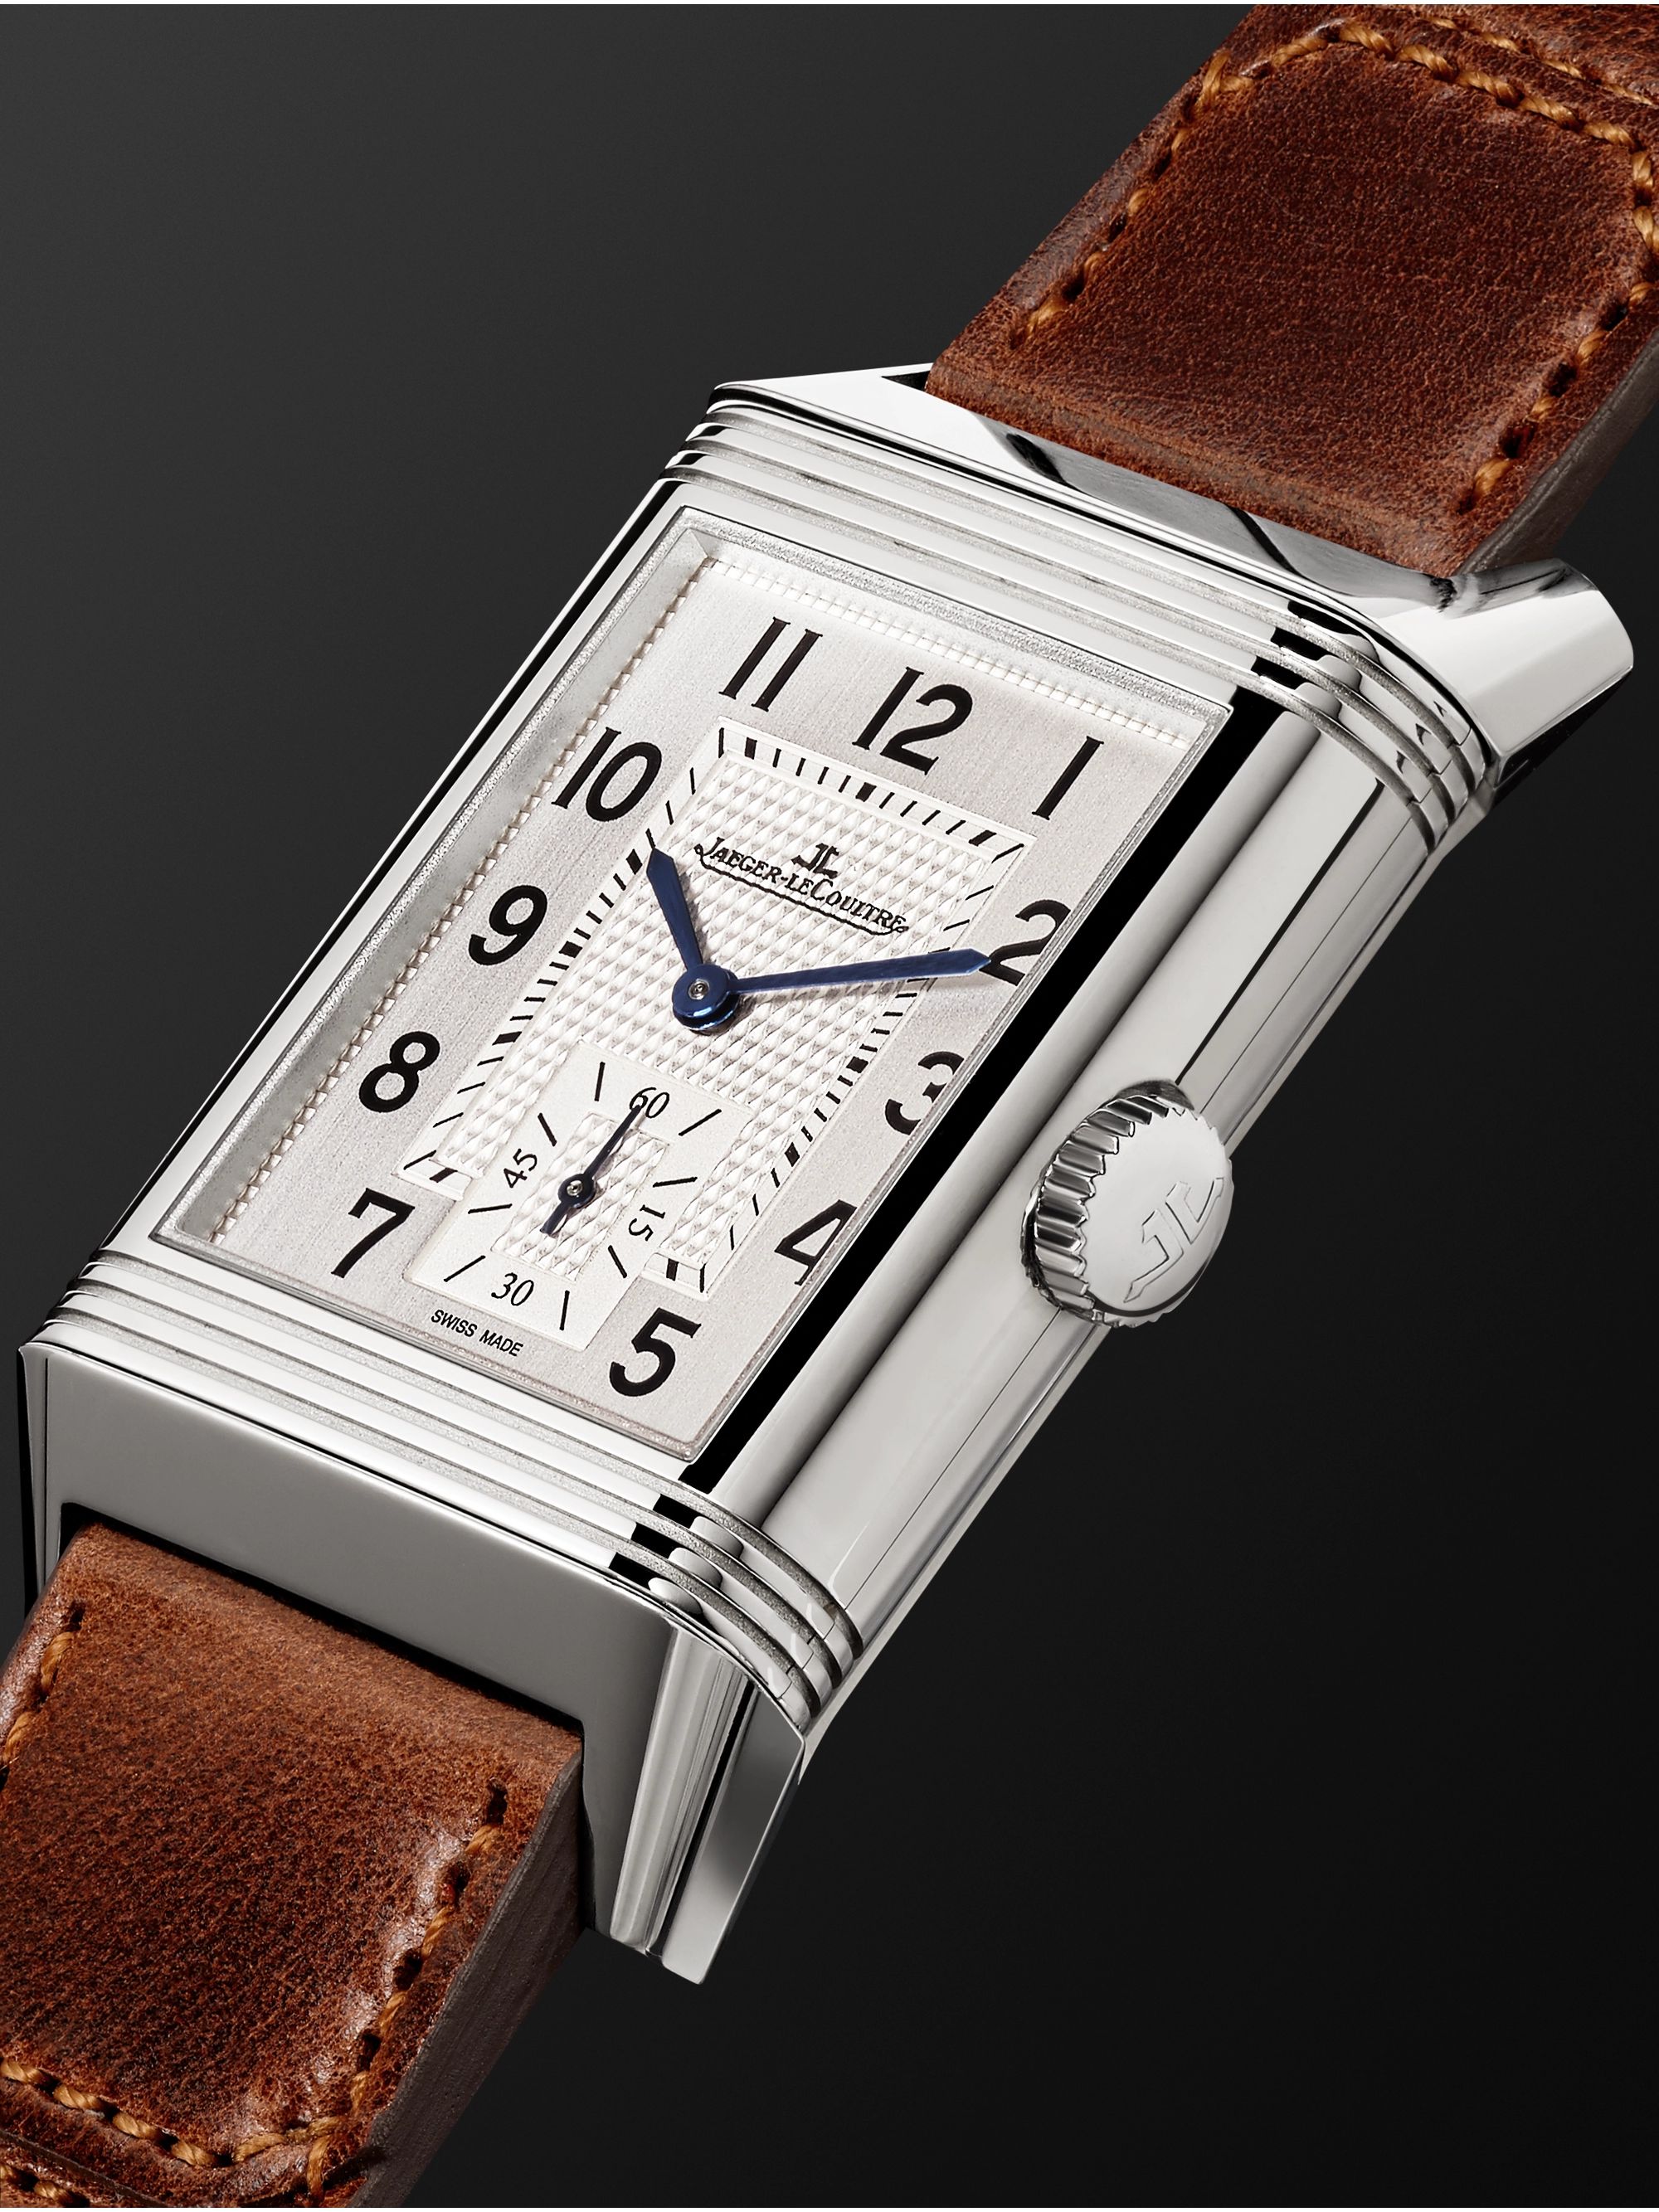 JAEGER-LECOULTRE Reverso Classic Large Duoface Hand-Wound 47mm x 28.3mm Stainless Steel and Leather Watch, Ref. No. Q3848422